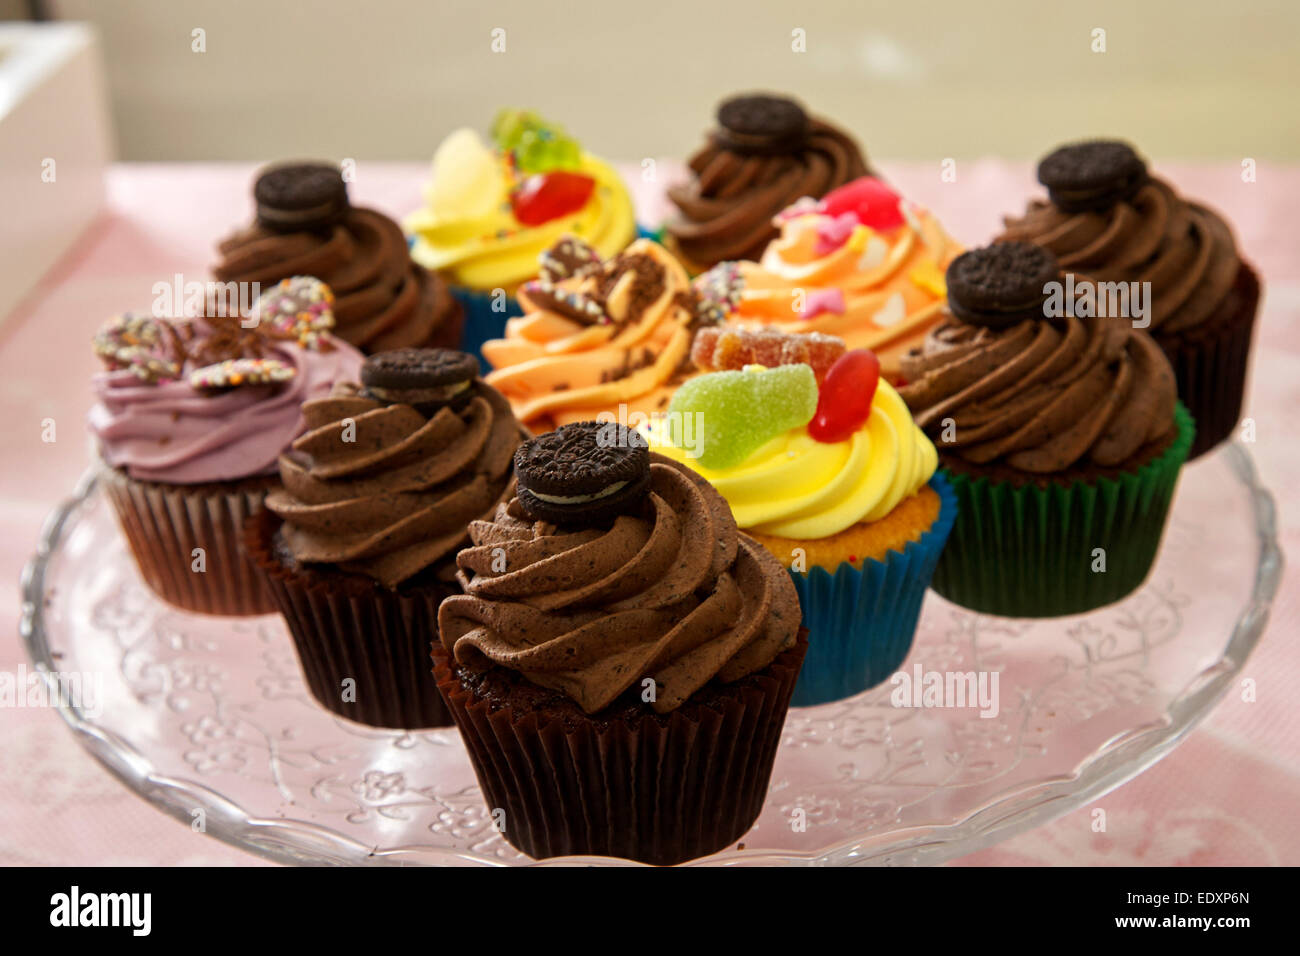 fresh baked cupcakes on a specialty artisan stall at a craft market Stock Photo